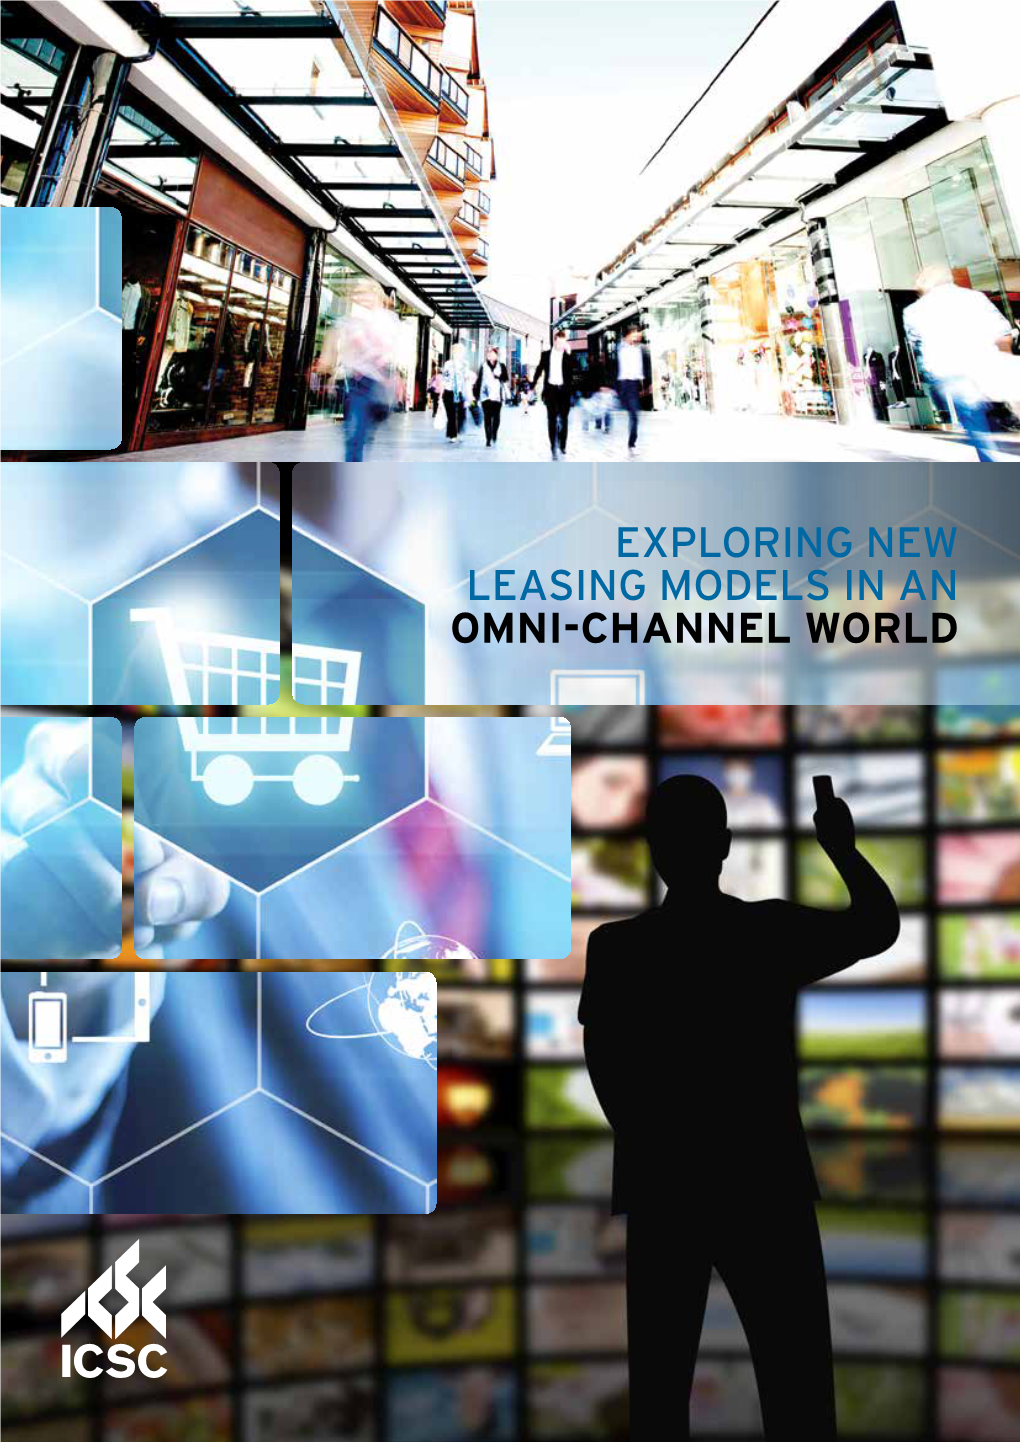 Exploring New Leasing Models in an OMNI-CHANNEL WORLD